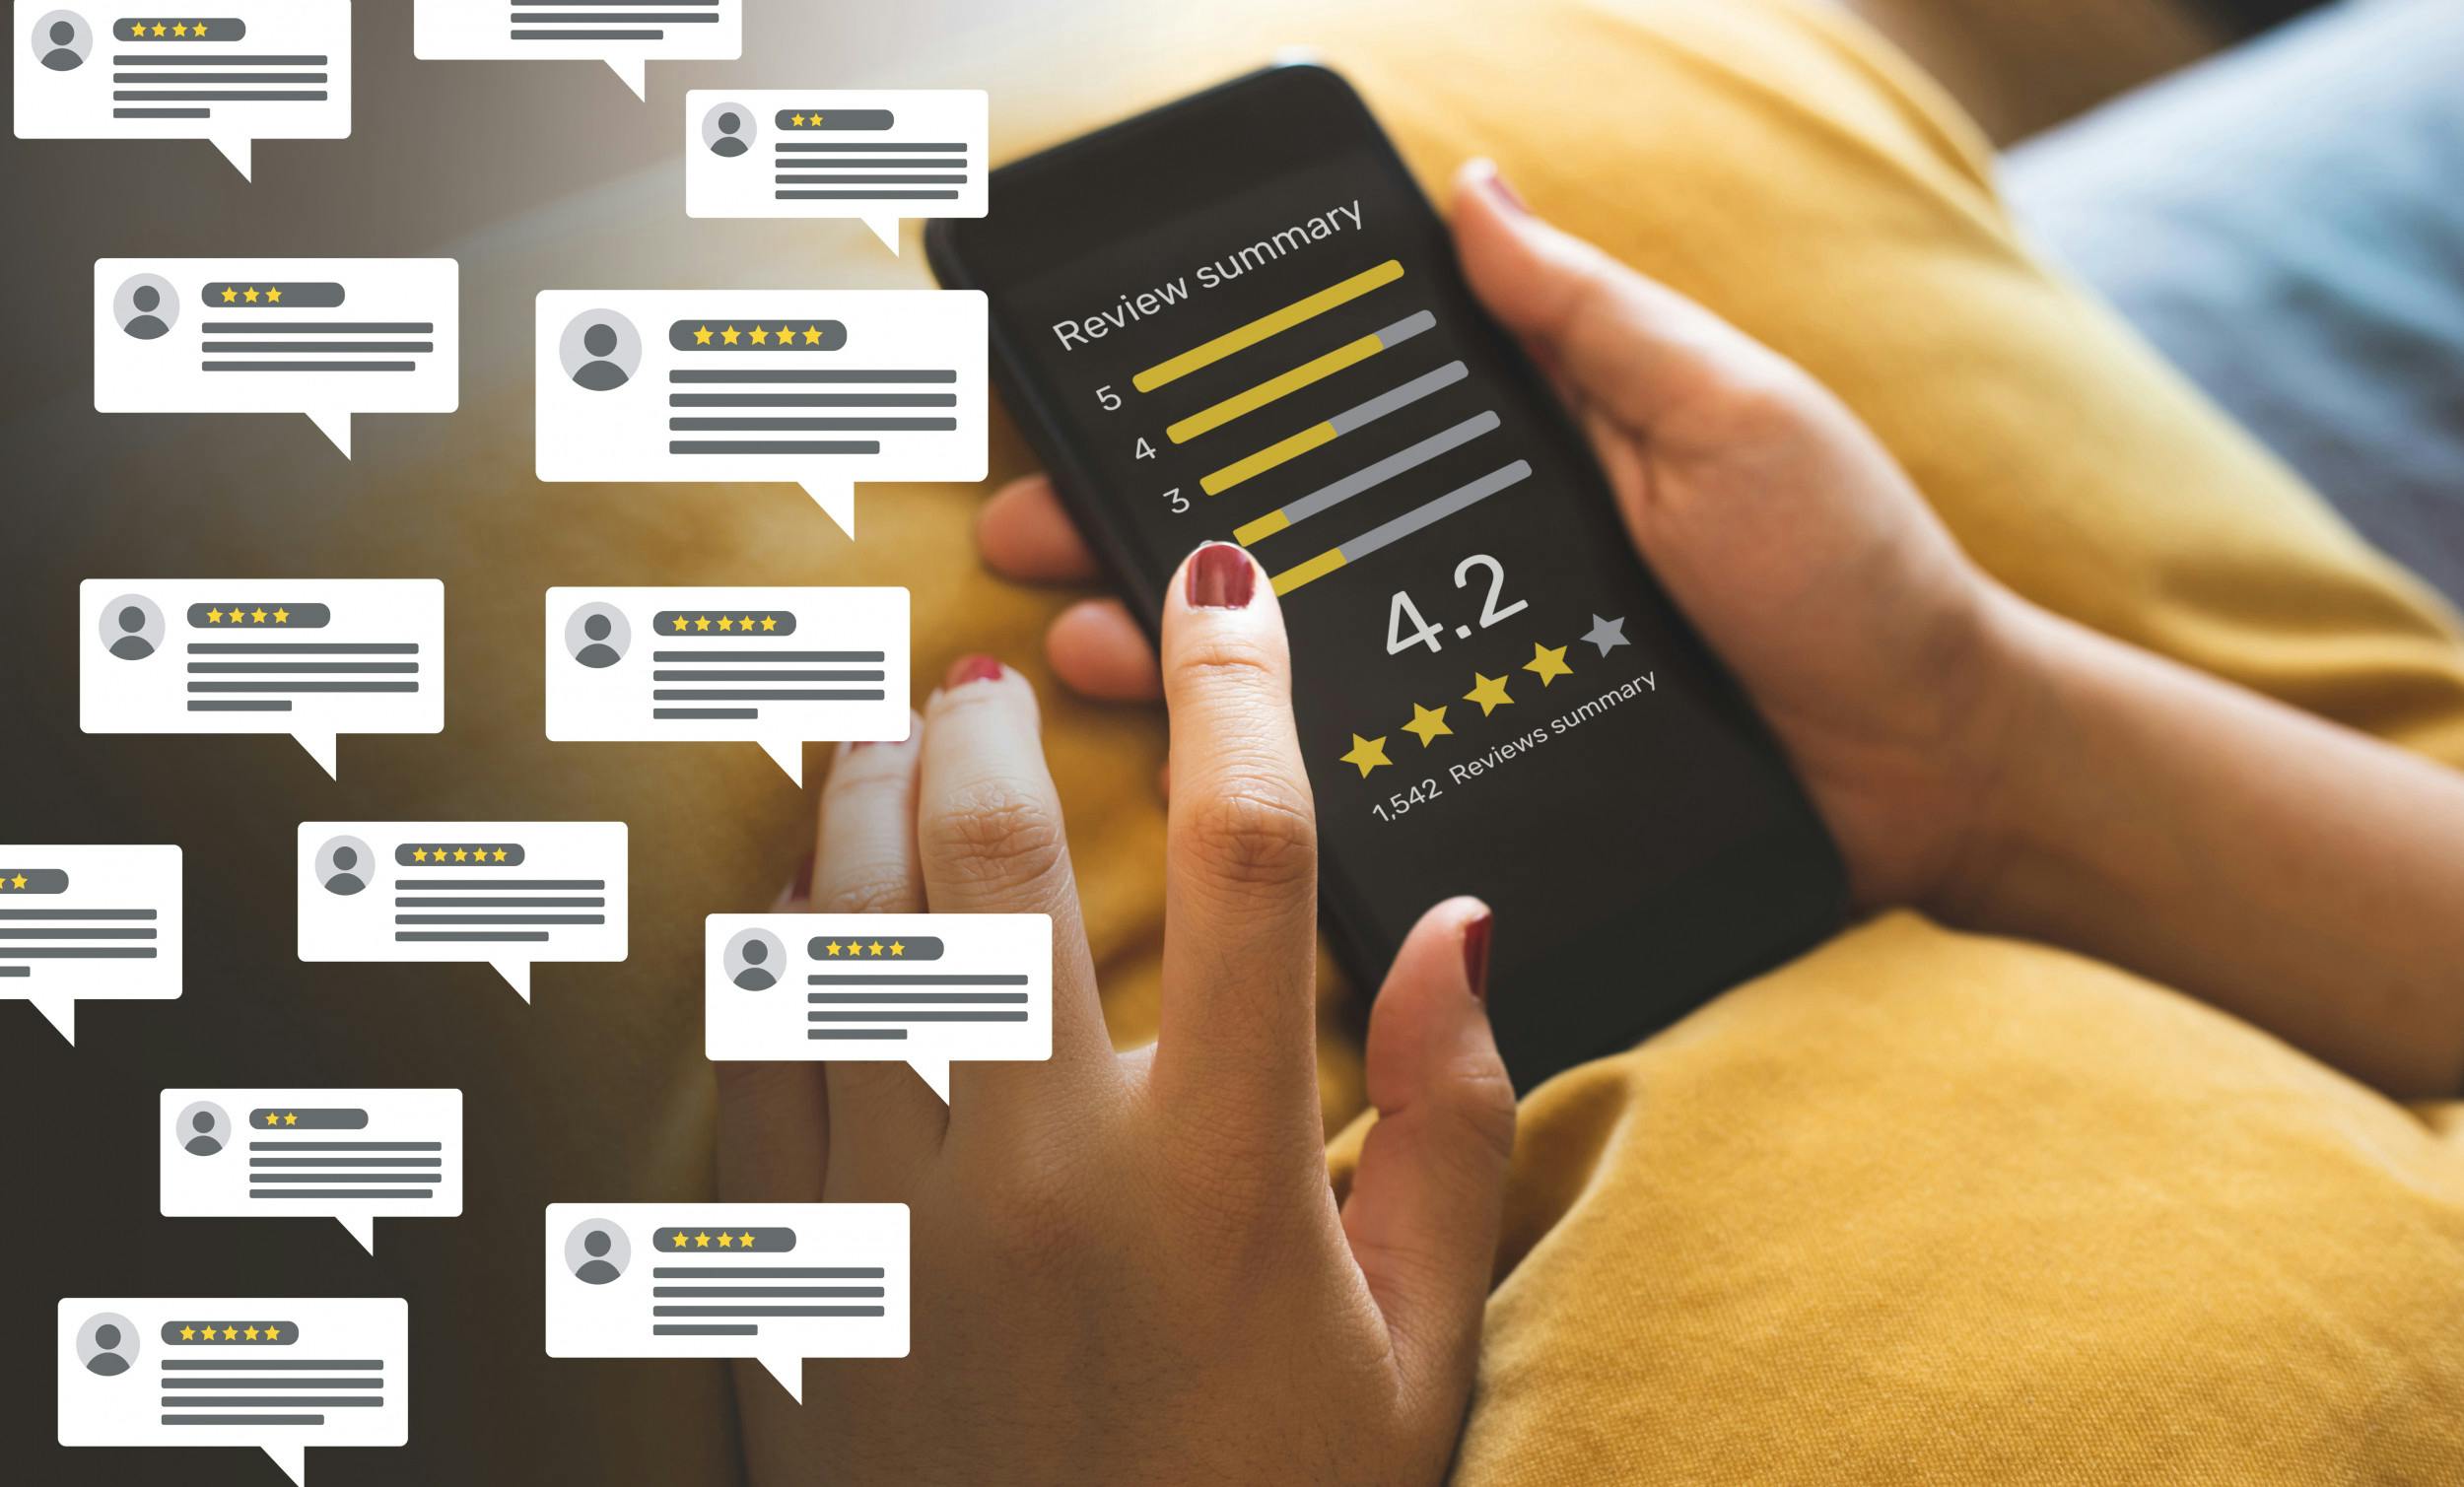 Seven Ways Businesses Can Get More Online Reviews